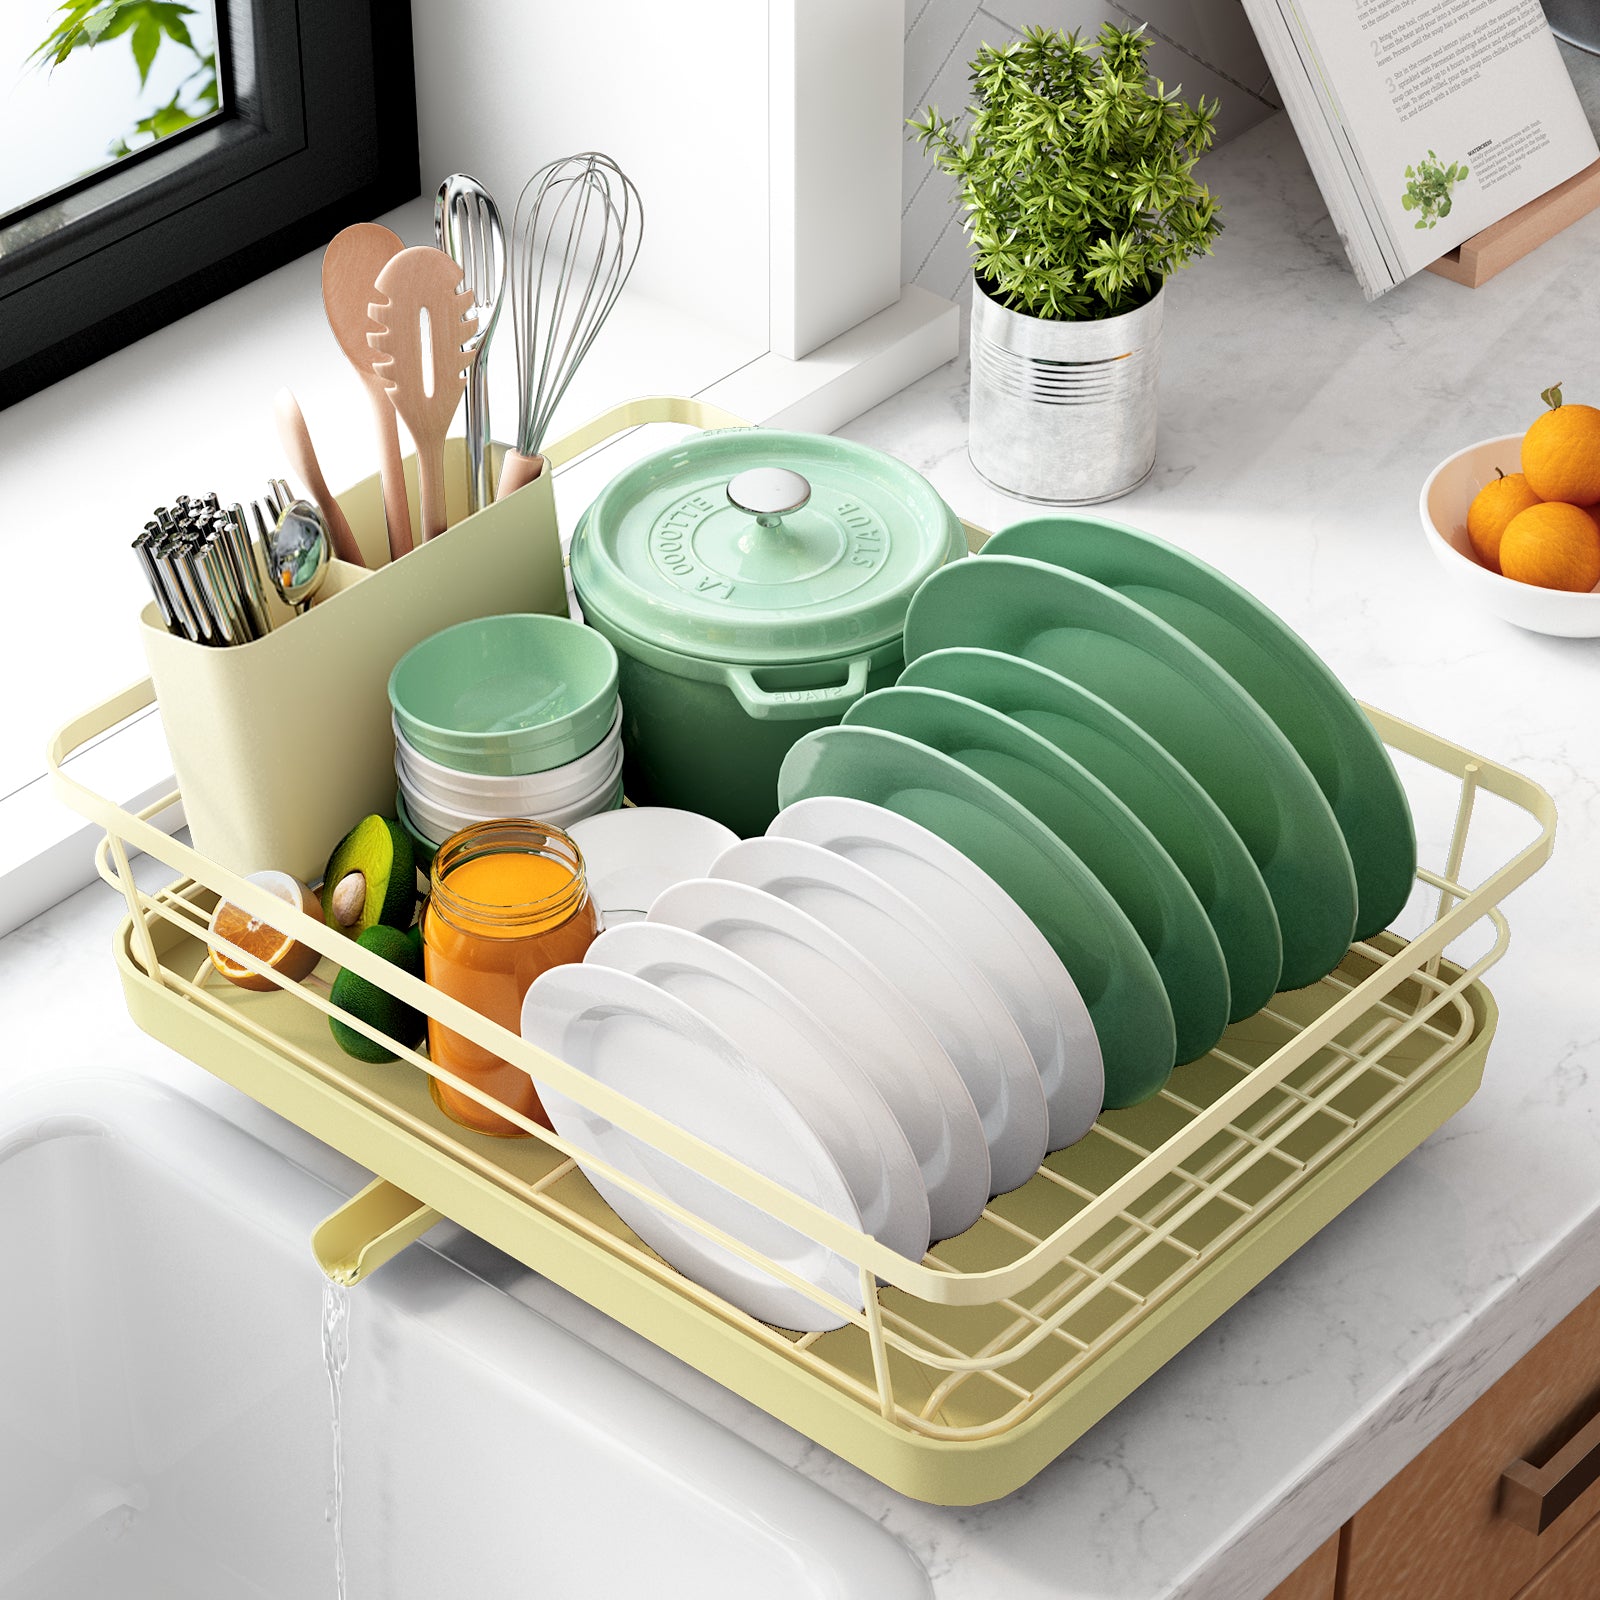 Qienrrae Dish Drying Rack and Drainboard Set, 304 Stainless Steel